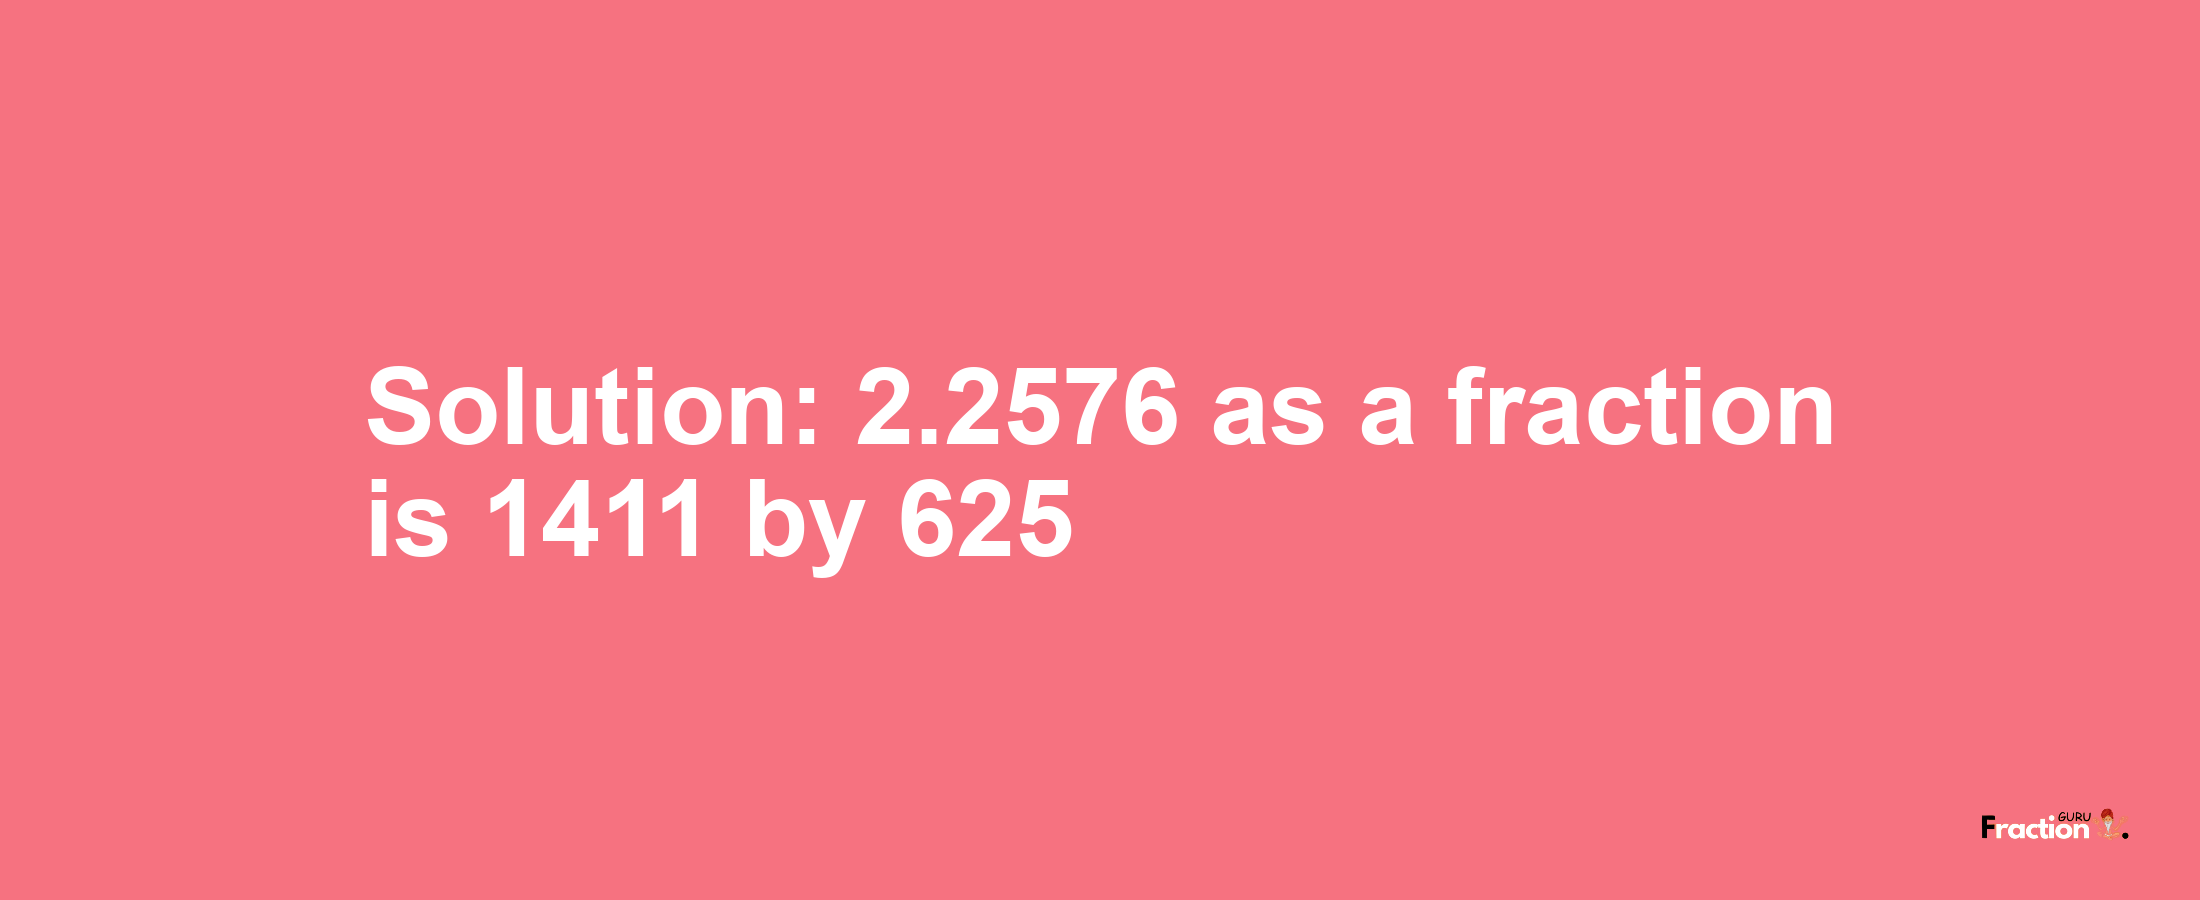 Solution:2.2576 as a fraction is 1411/625